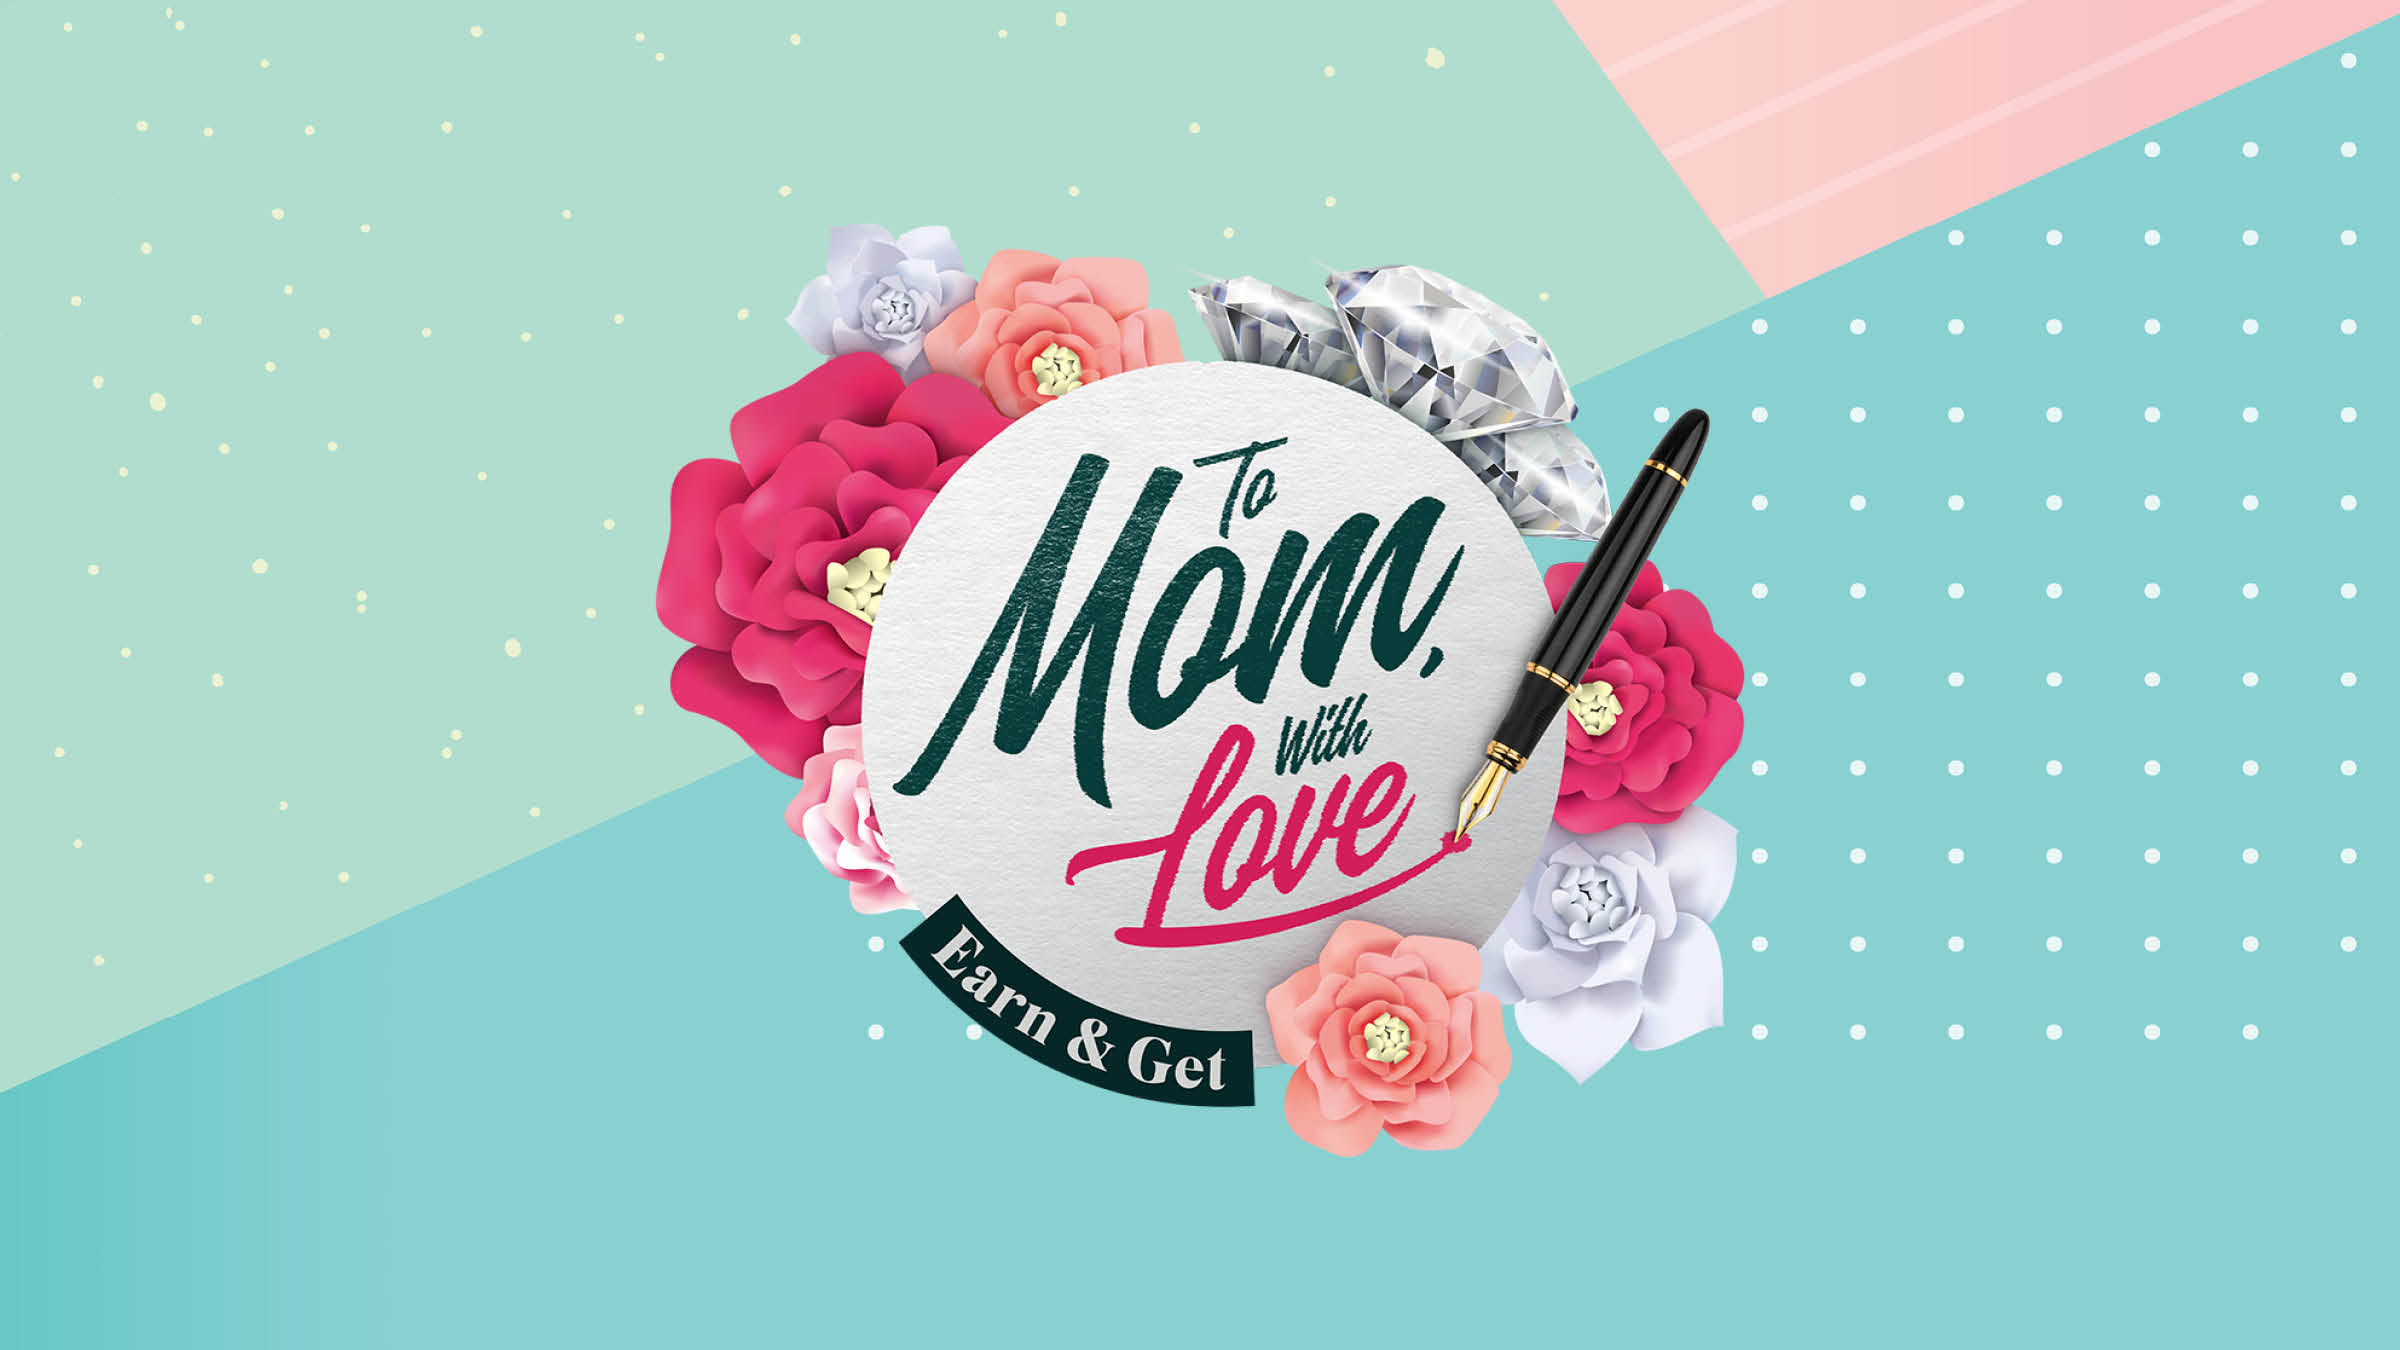 TO MOM, WITH LOVE Earn & Get